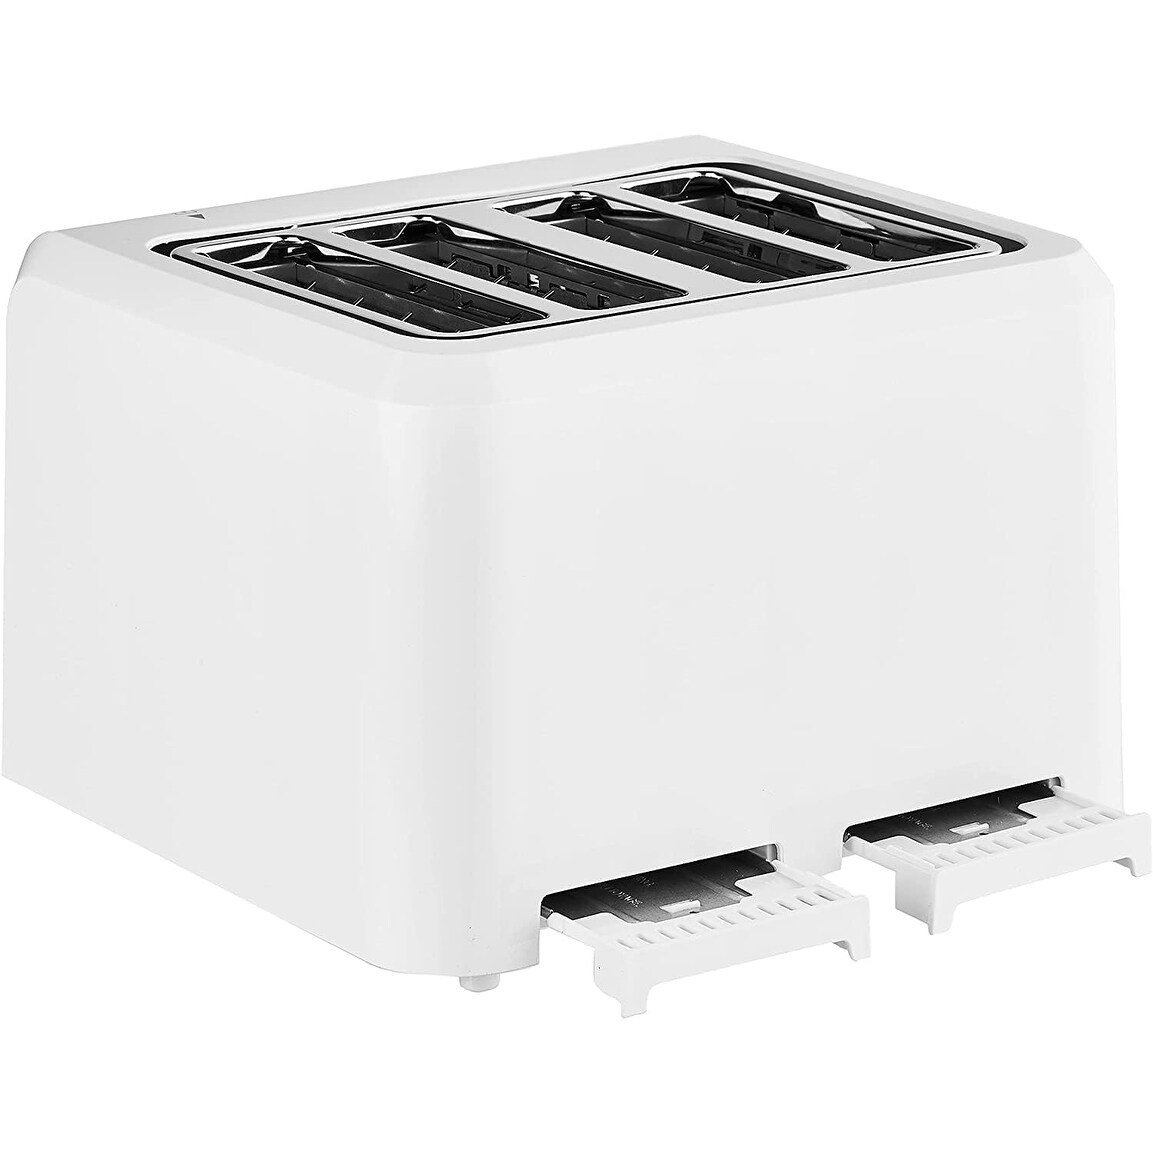 4 Slice Compact Toaster